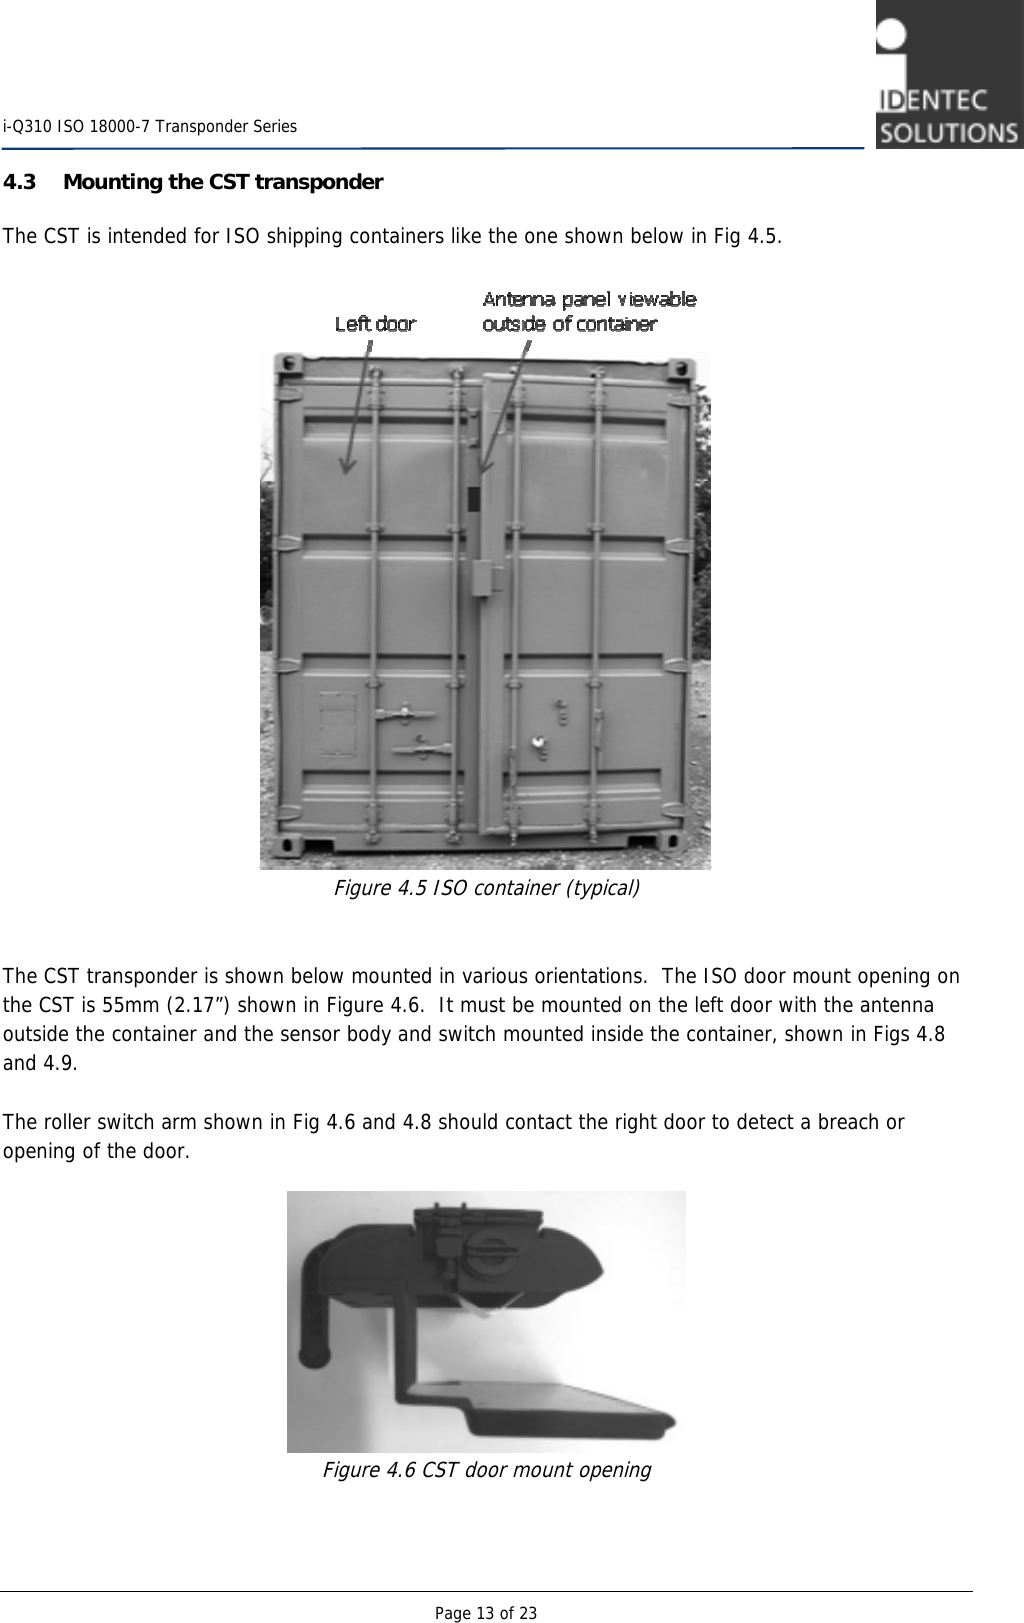    i-Q310 ISO 18000-7 Transponder Series  Page 13 of 23 4.3 Mounting the CST transponder The CST is intended for ISO shipping containers like the one shown below in Fig 4.5.     Figure 4.5 ISO container (typical)   The CST transponder is shown below mounted in various orientations.  The ISO door mount opening on the CST is 55mm (2.17”) shown in Figure 4.6.  It must be mounted on the left door with the antenna outside the container and the sensor body and switch mounted inside the container, shown in Figs 4.8 and 4.9.  The roller switch arm shown in Fig 4.6 and 4.8 should contact the right door to detect a breach or opening of the door.   Figure 4.6 CST door mount opening   